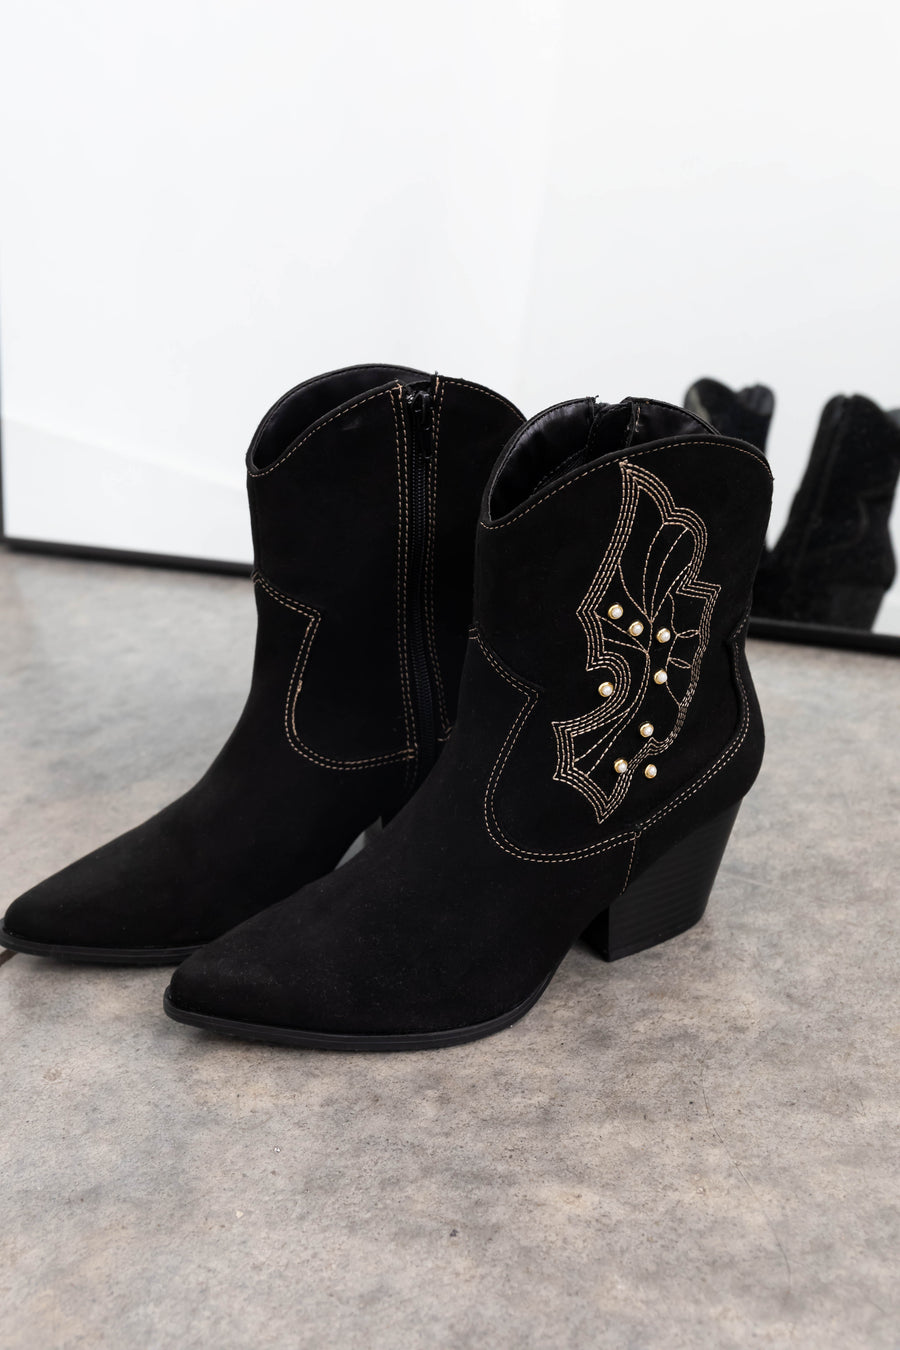 Black Suede Studded Western Style Booties